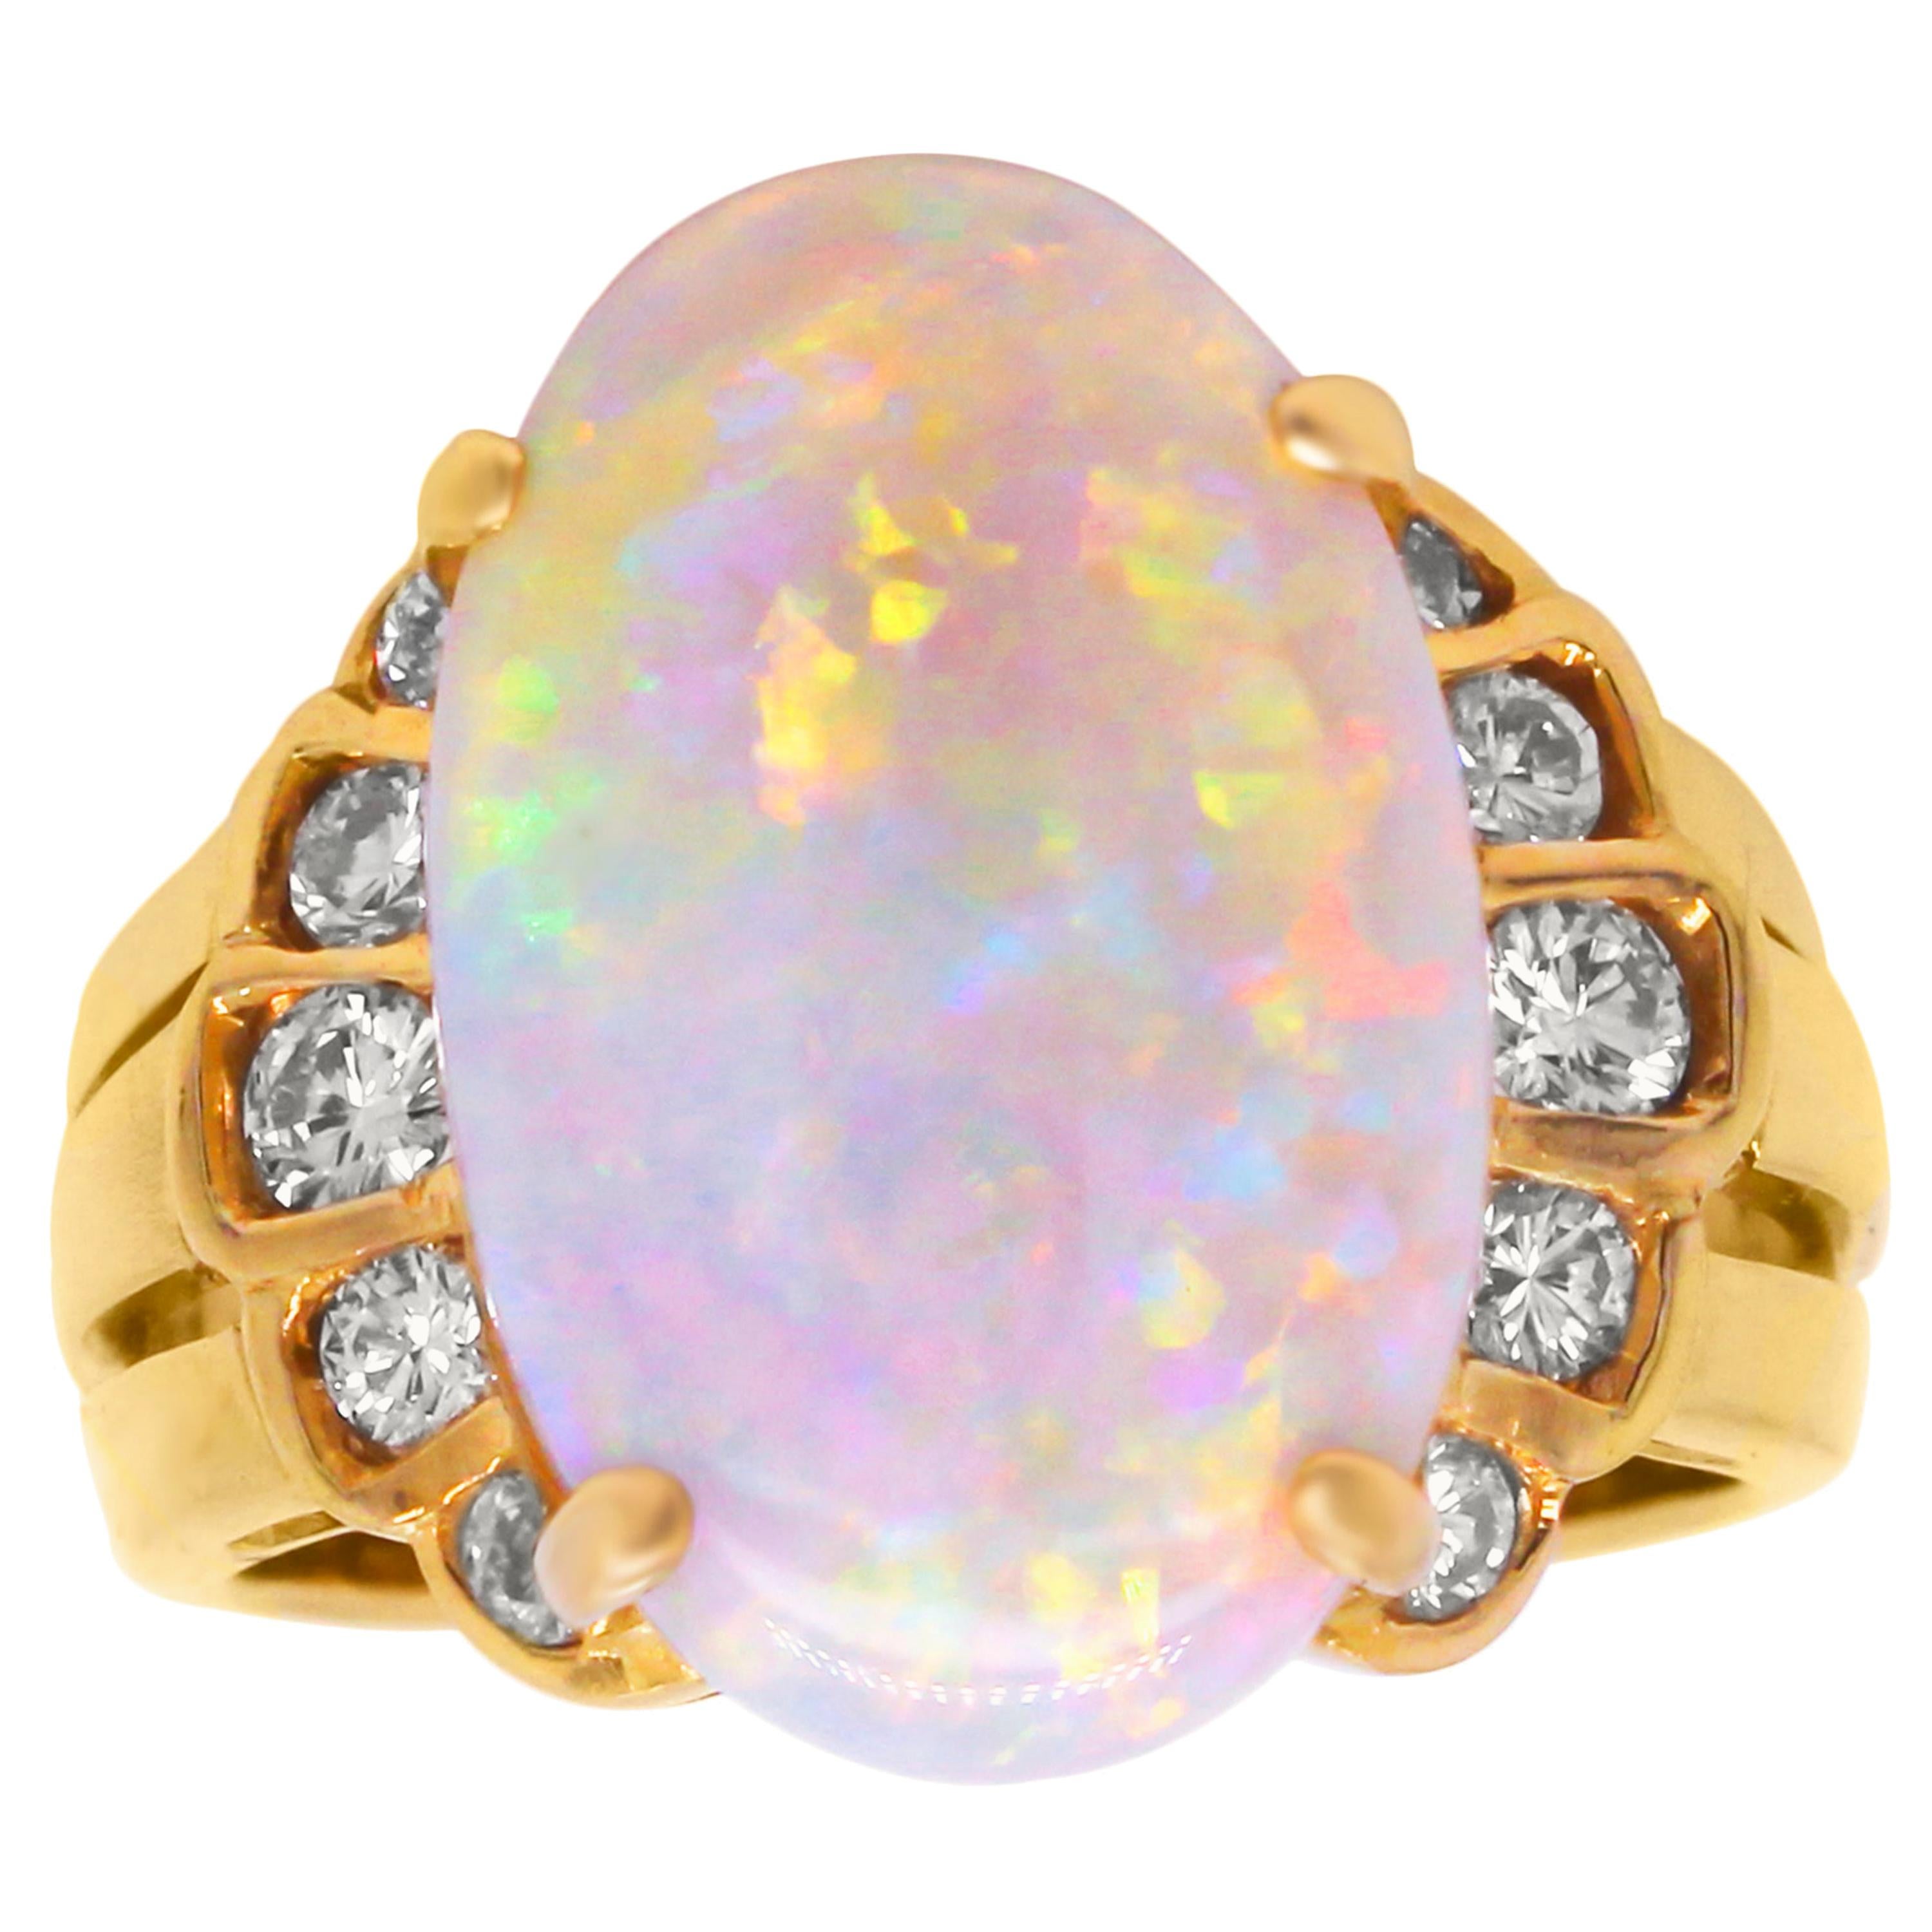 Yellow Gold and Diamond Cocktail Ring with Oval Ethiopian Opal Center